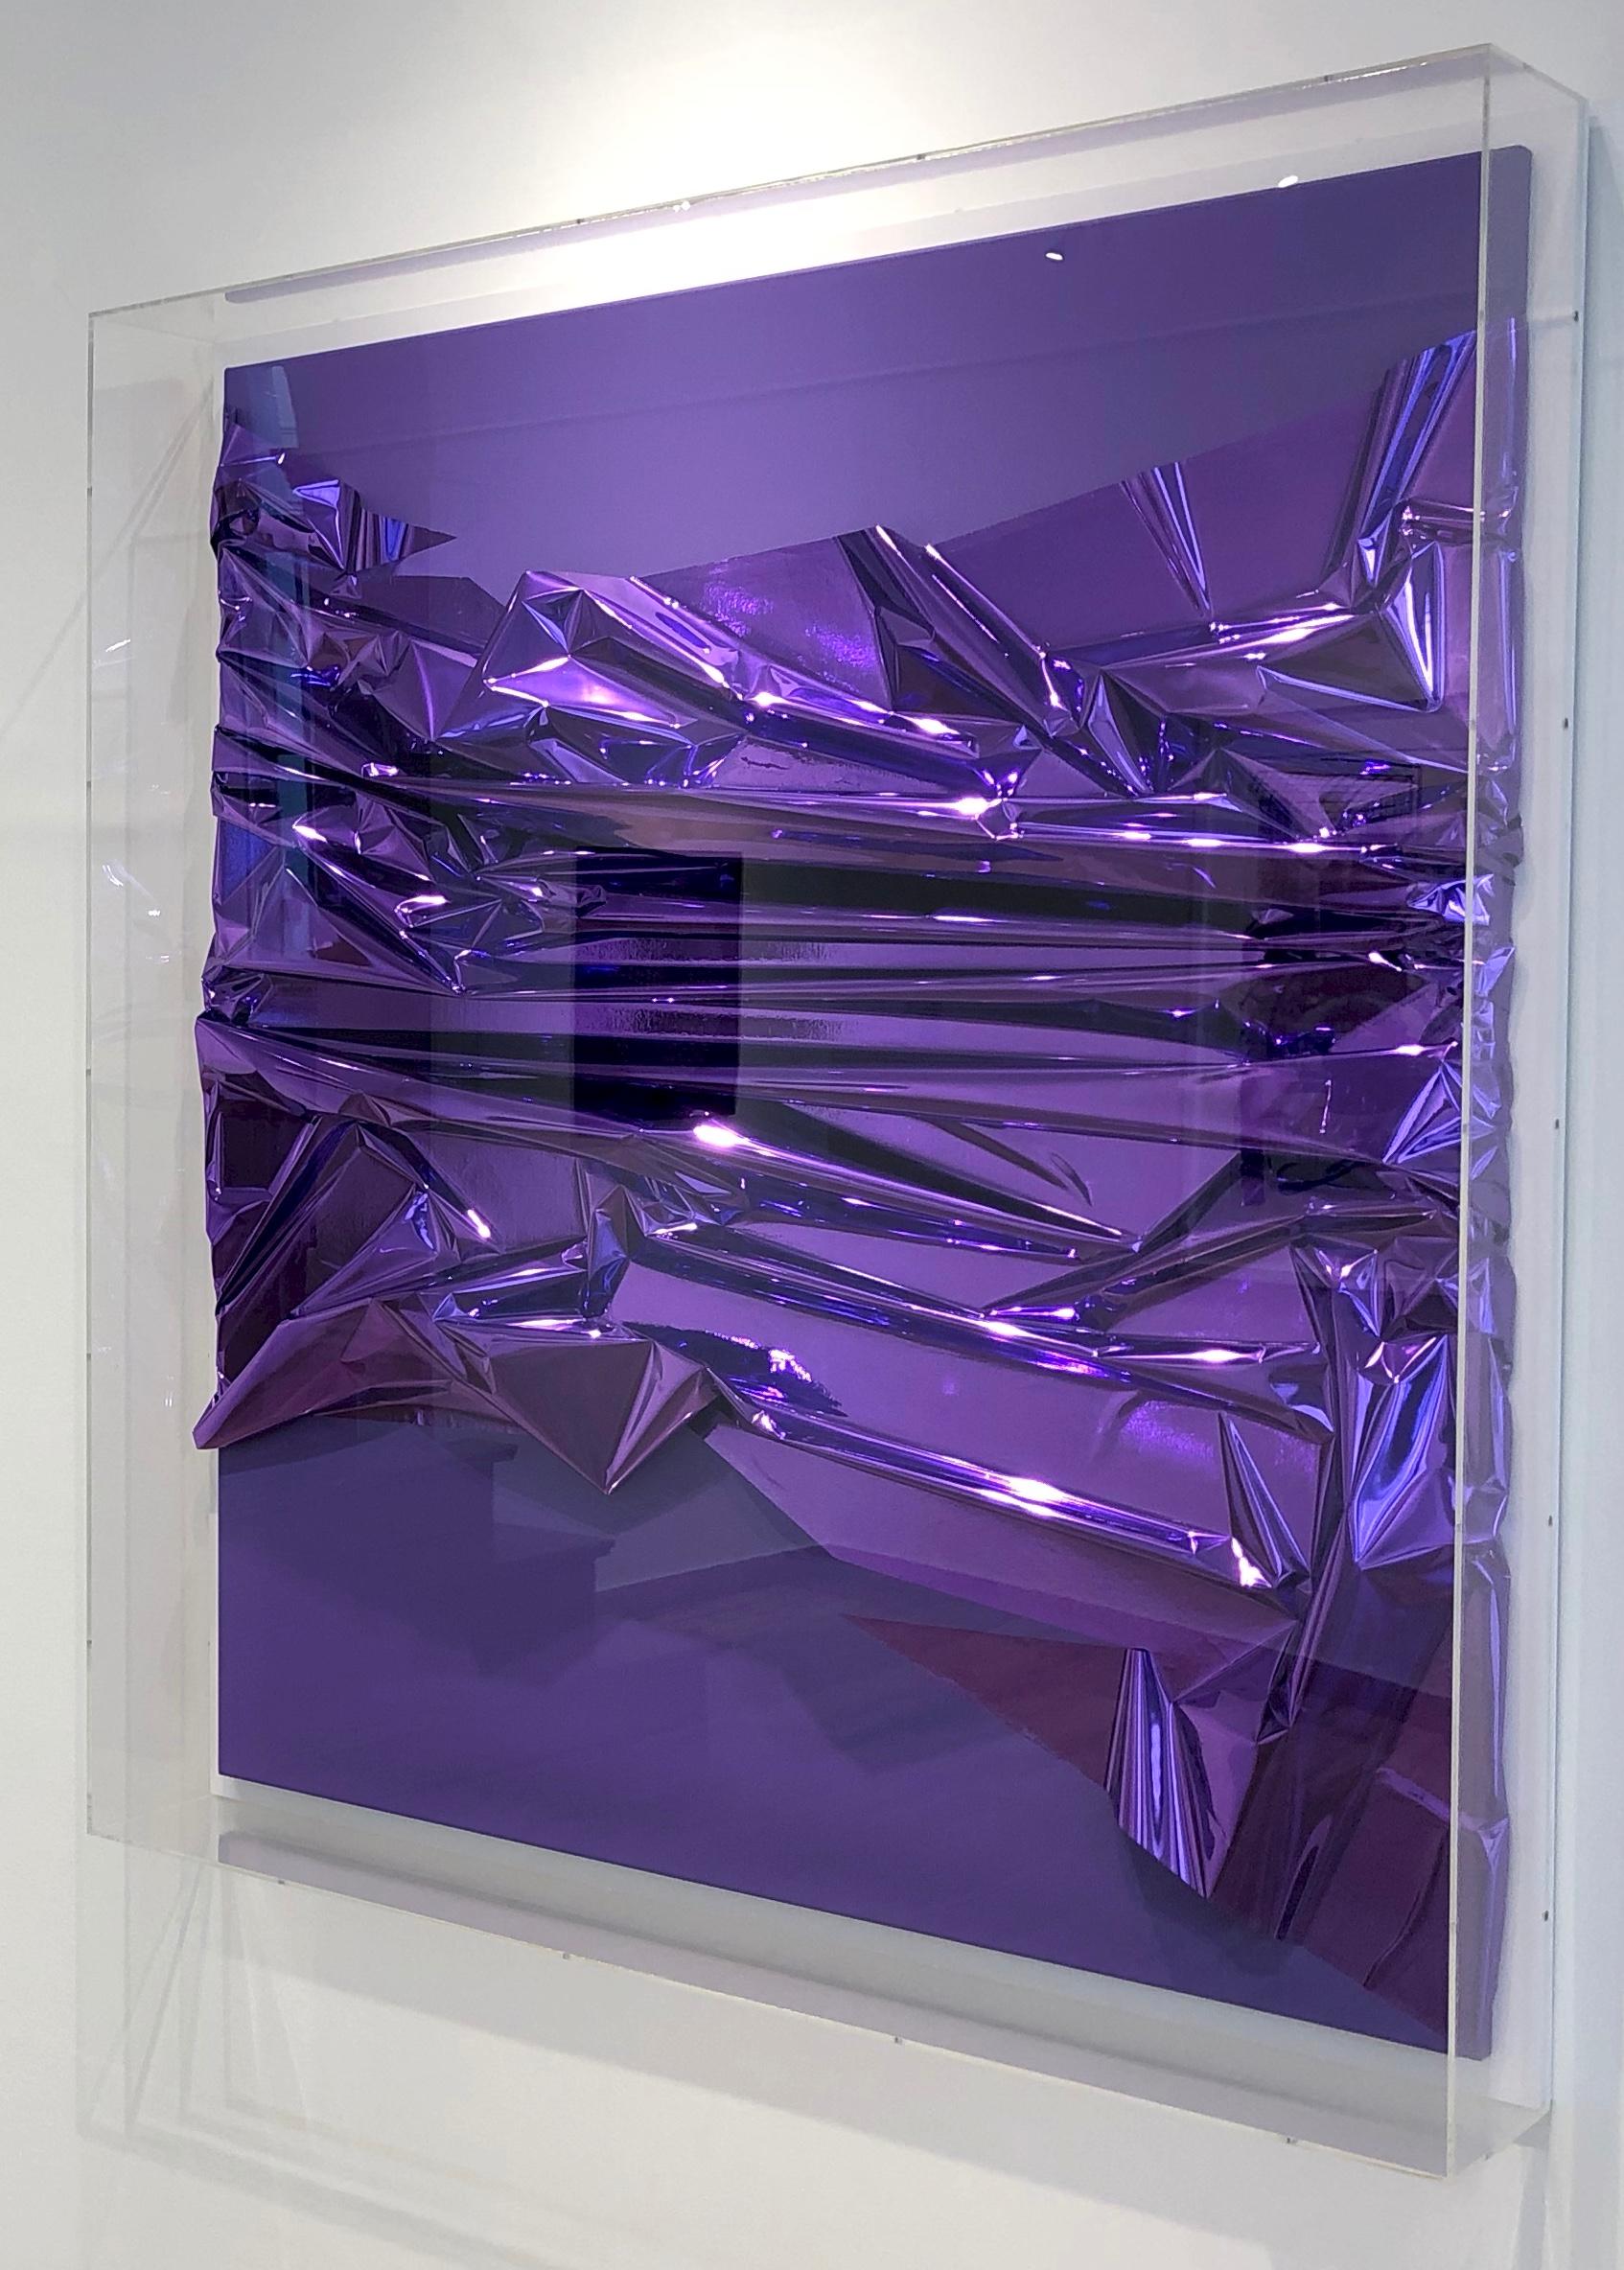 Untitled Untitled, 2007, foil painting, mixed media, abstract art object, purple - Mixed Media Art by Anselm Reyle